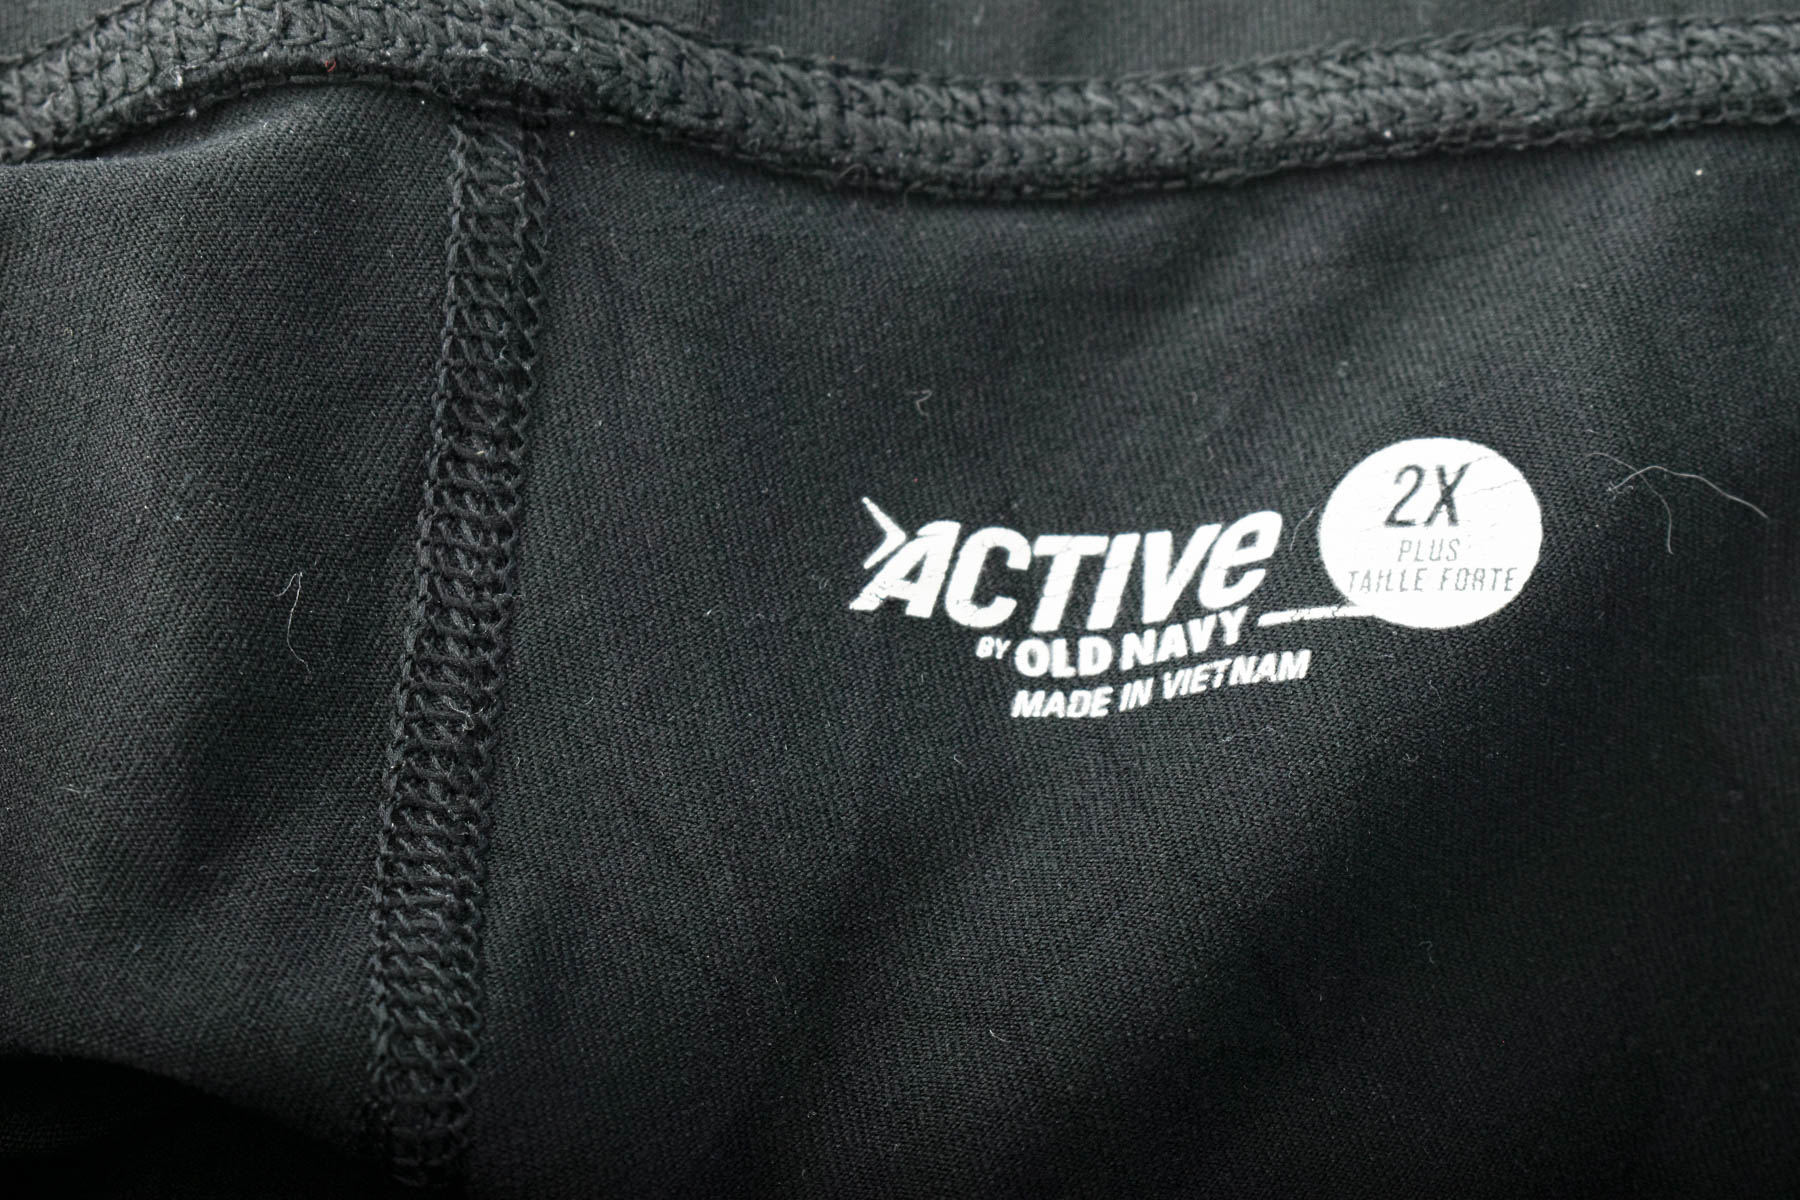 Leggings - ACTIVE BY OLD NAVY - 2